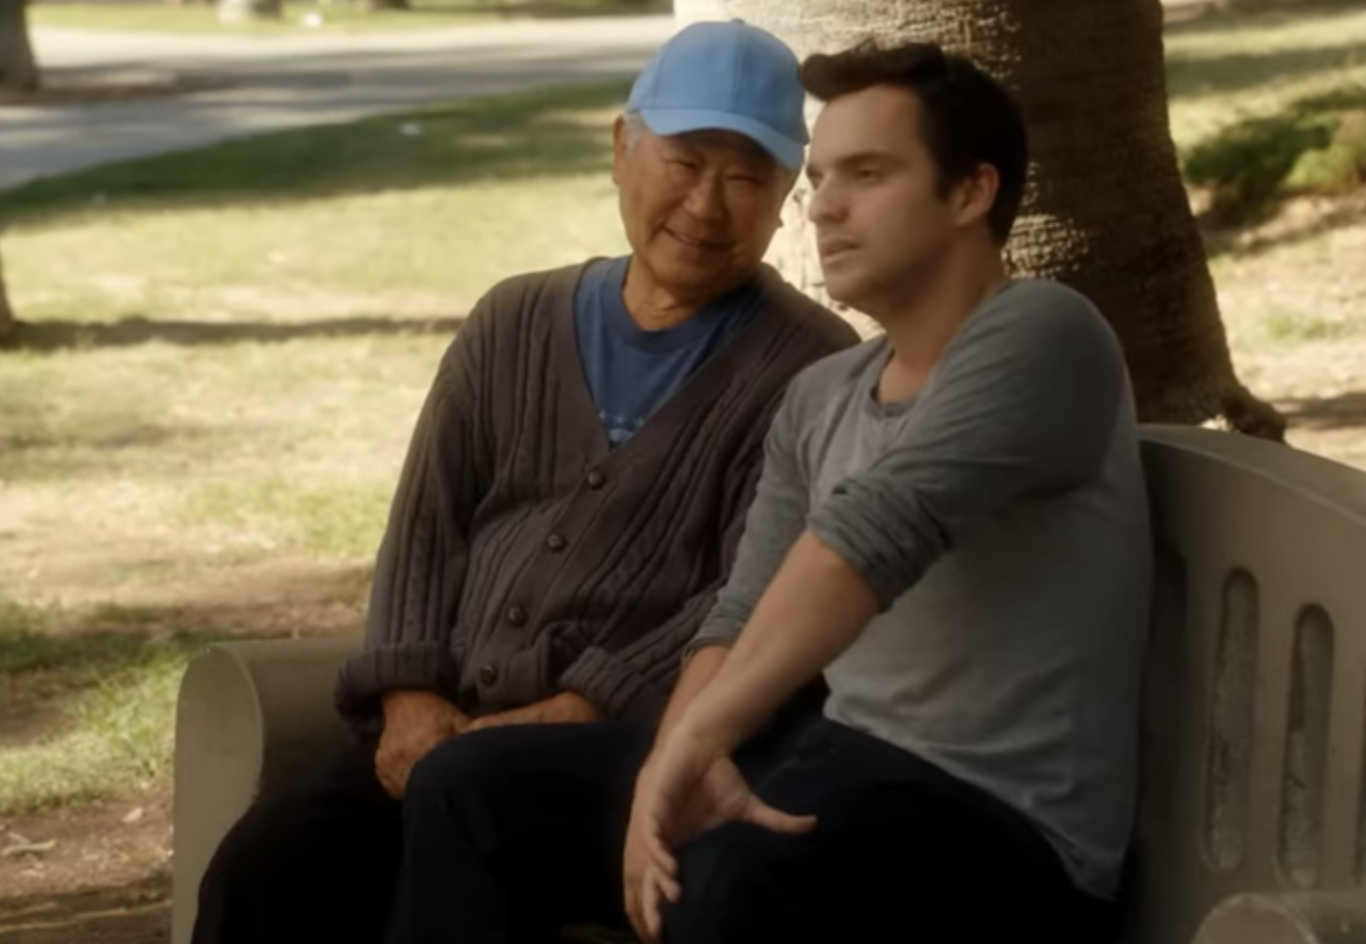 scene from New Girl where the character sits on a park bench to talk to an older friend